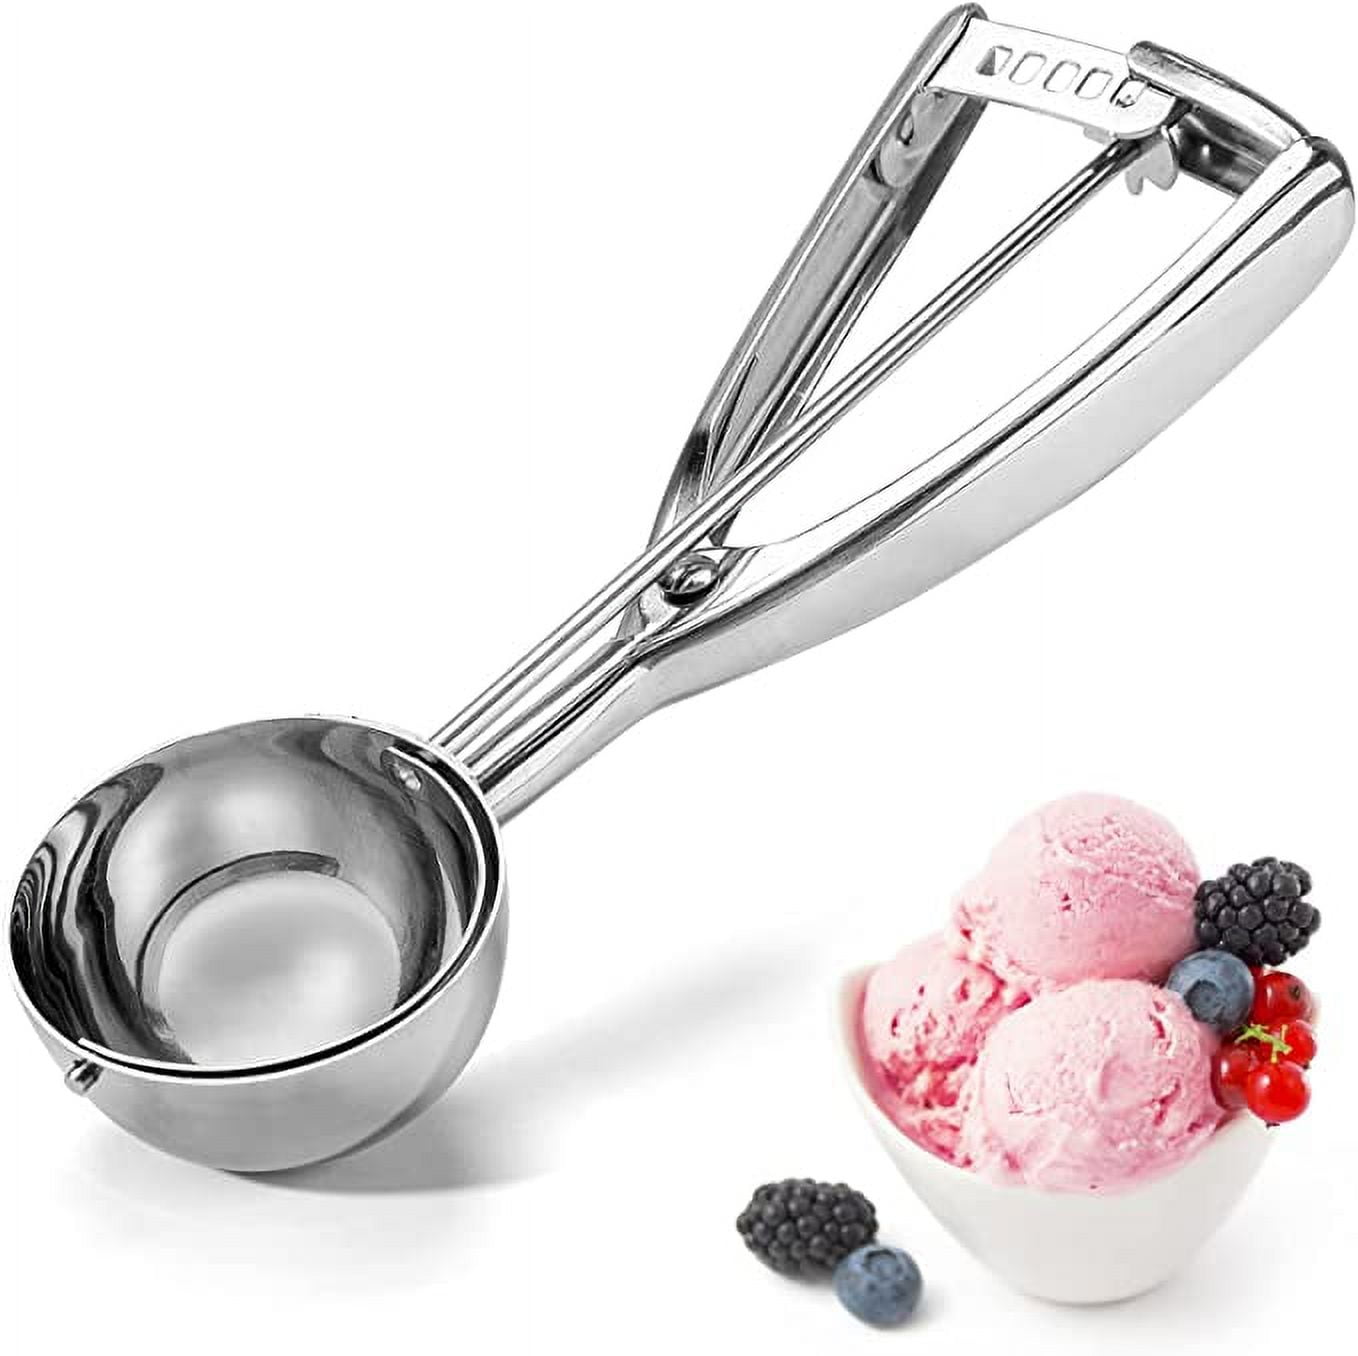 2PCS Summer Ice Cream Scoop with Trigger, Stainless Steel Ice Cream Spoon  Scooper for Mashed Potatoes, Melon Balls, Meat Balls, Fruit Balls, Cupcake,  Mix Cookie Dough, Kitchen Utensil 